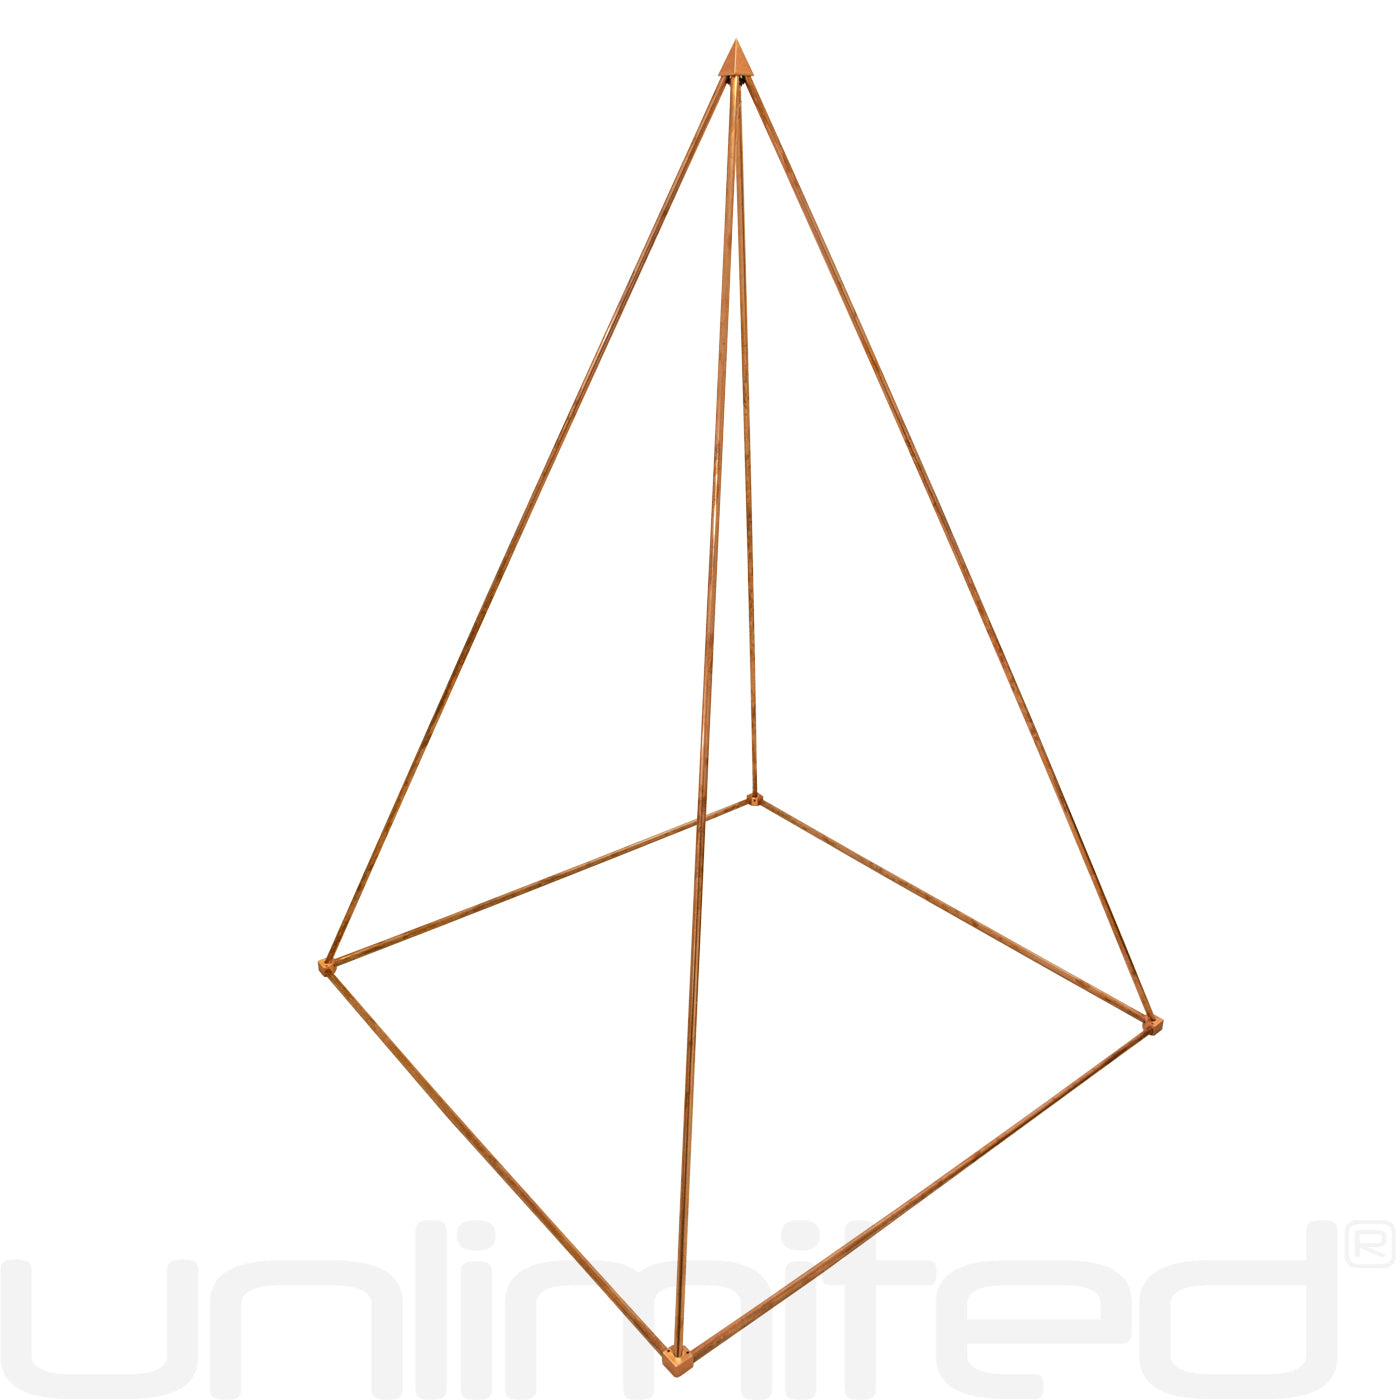 100% Solid Copper Pyramid 6 in Giza Shaped for Meditation, Body